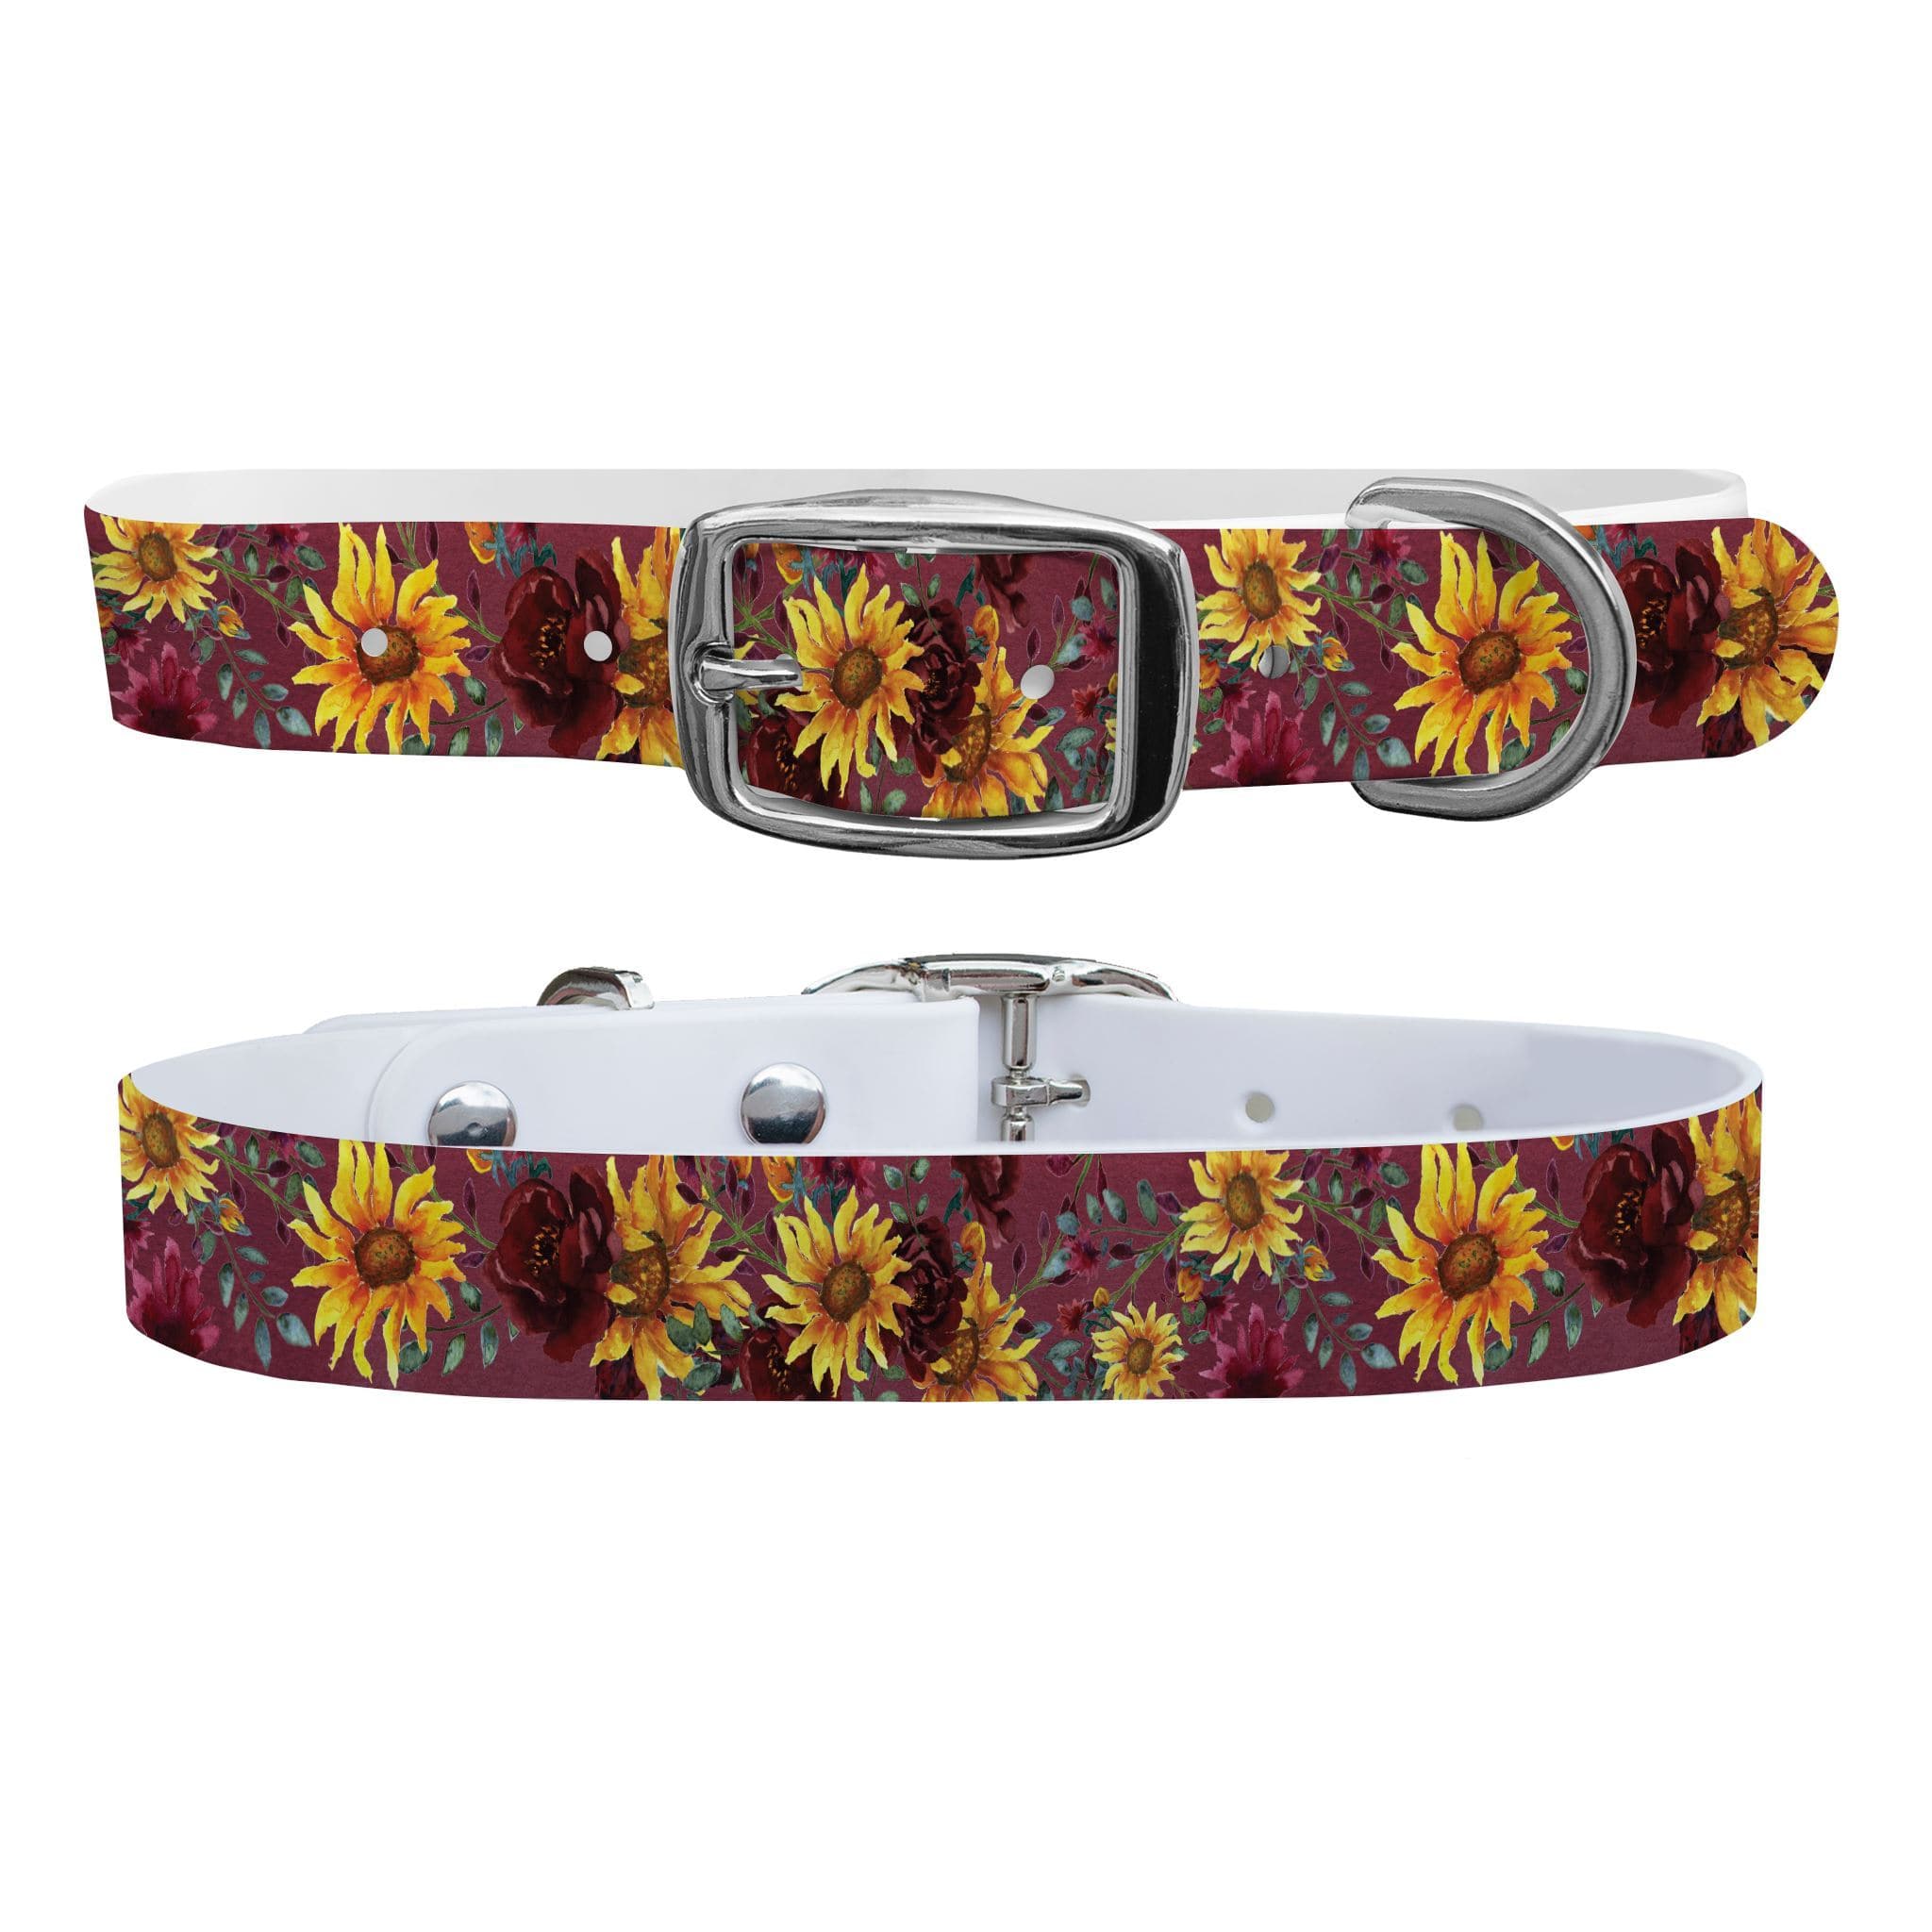 Merlot Sunflowers Dog Collar With Silver Buckle - X-Large